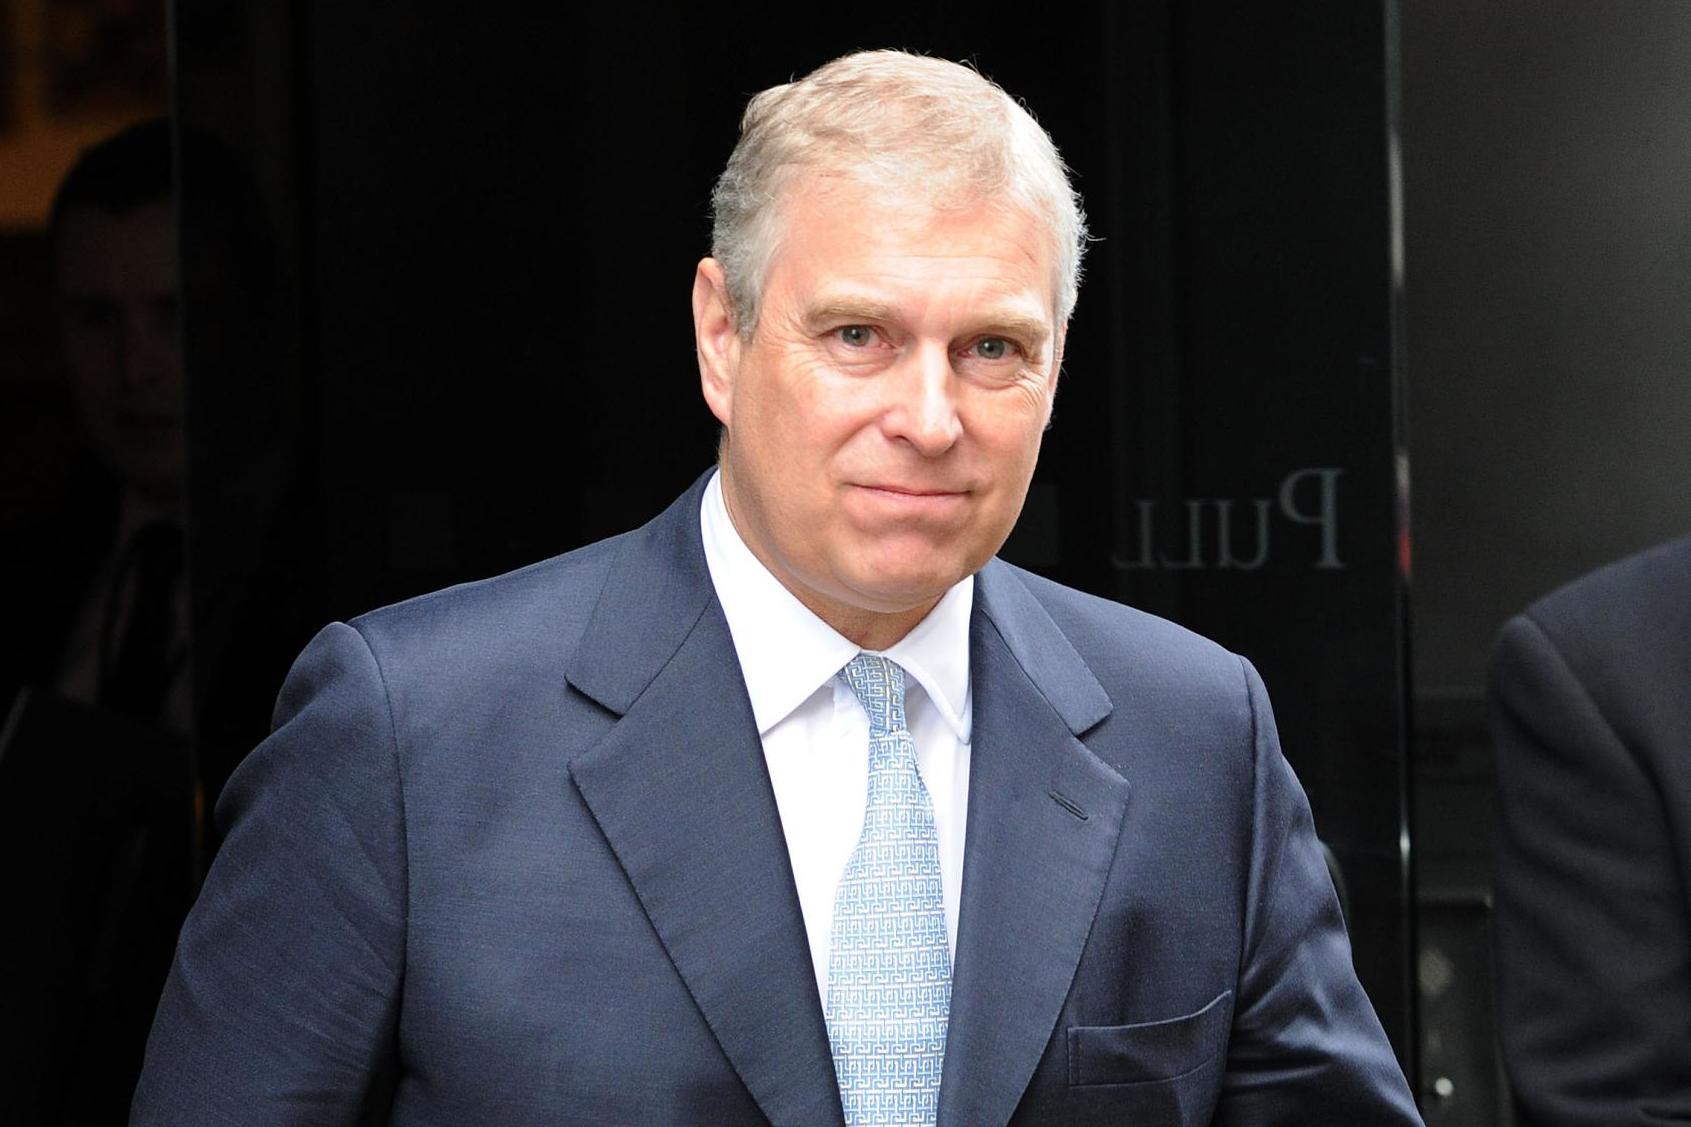 Prince Andrew has 'crucial information' in Epstein case, new documentary claims